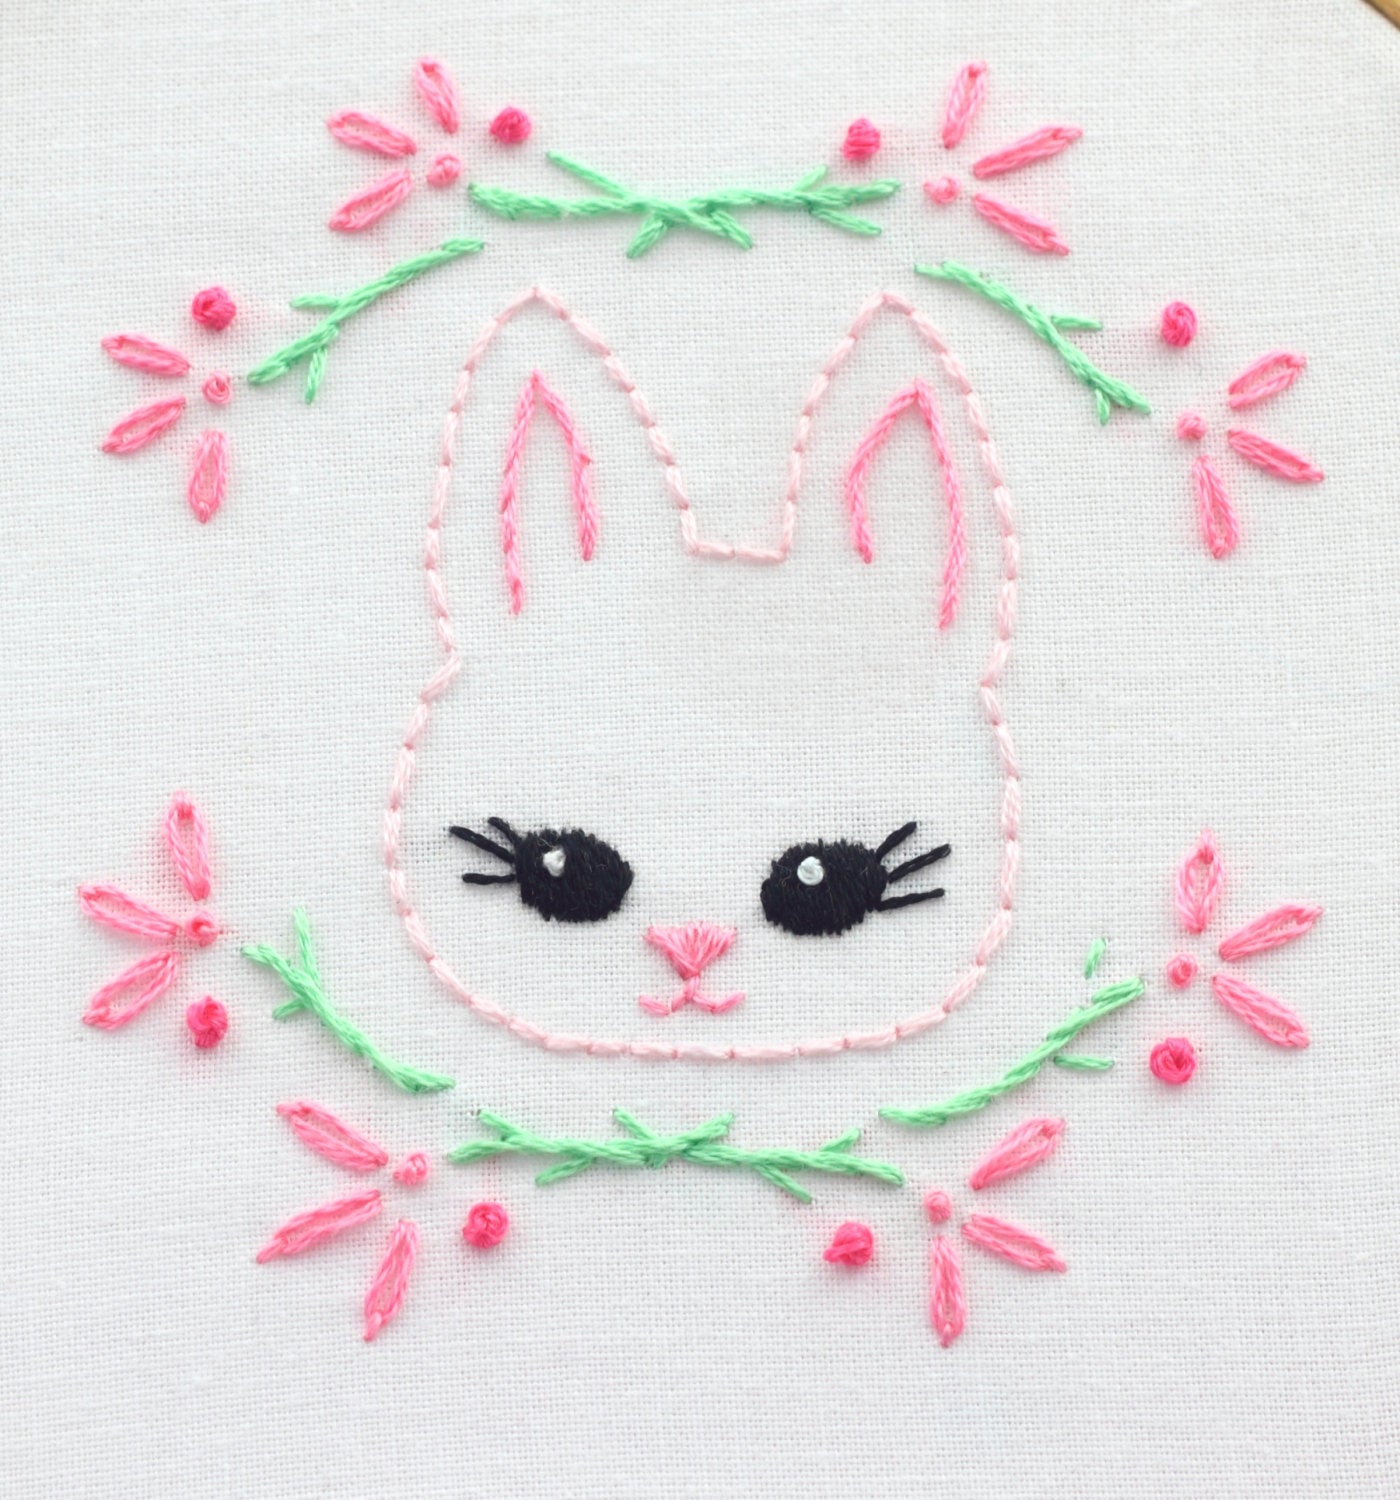 Free Hand Embroidery Patterns To Print Ba Girl Embroidery Design Ba Embroidery Pattern Hand Embroidery Girl